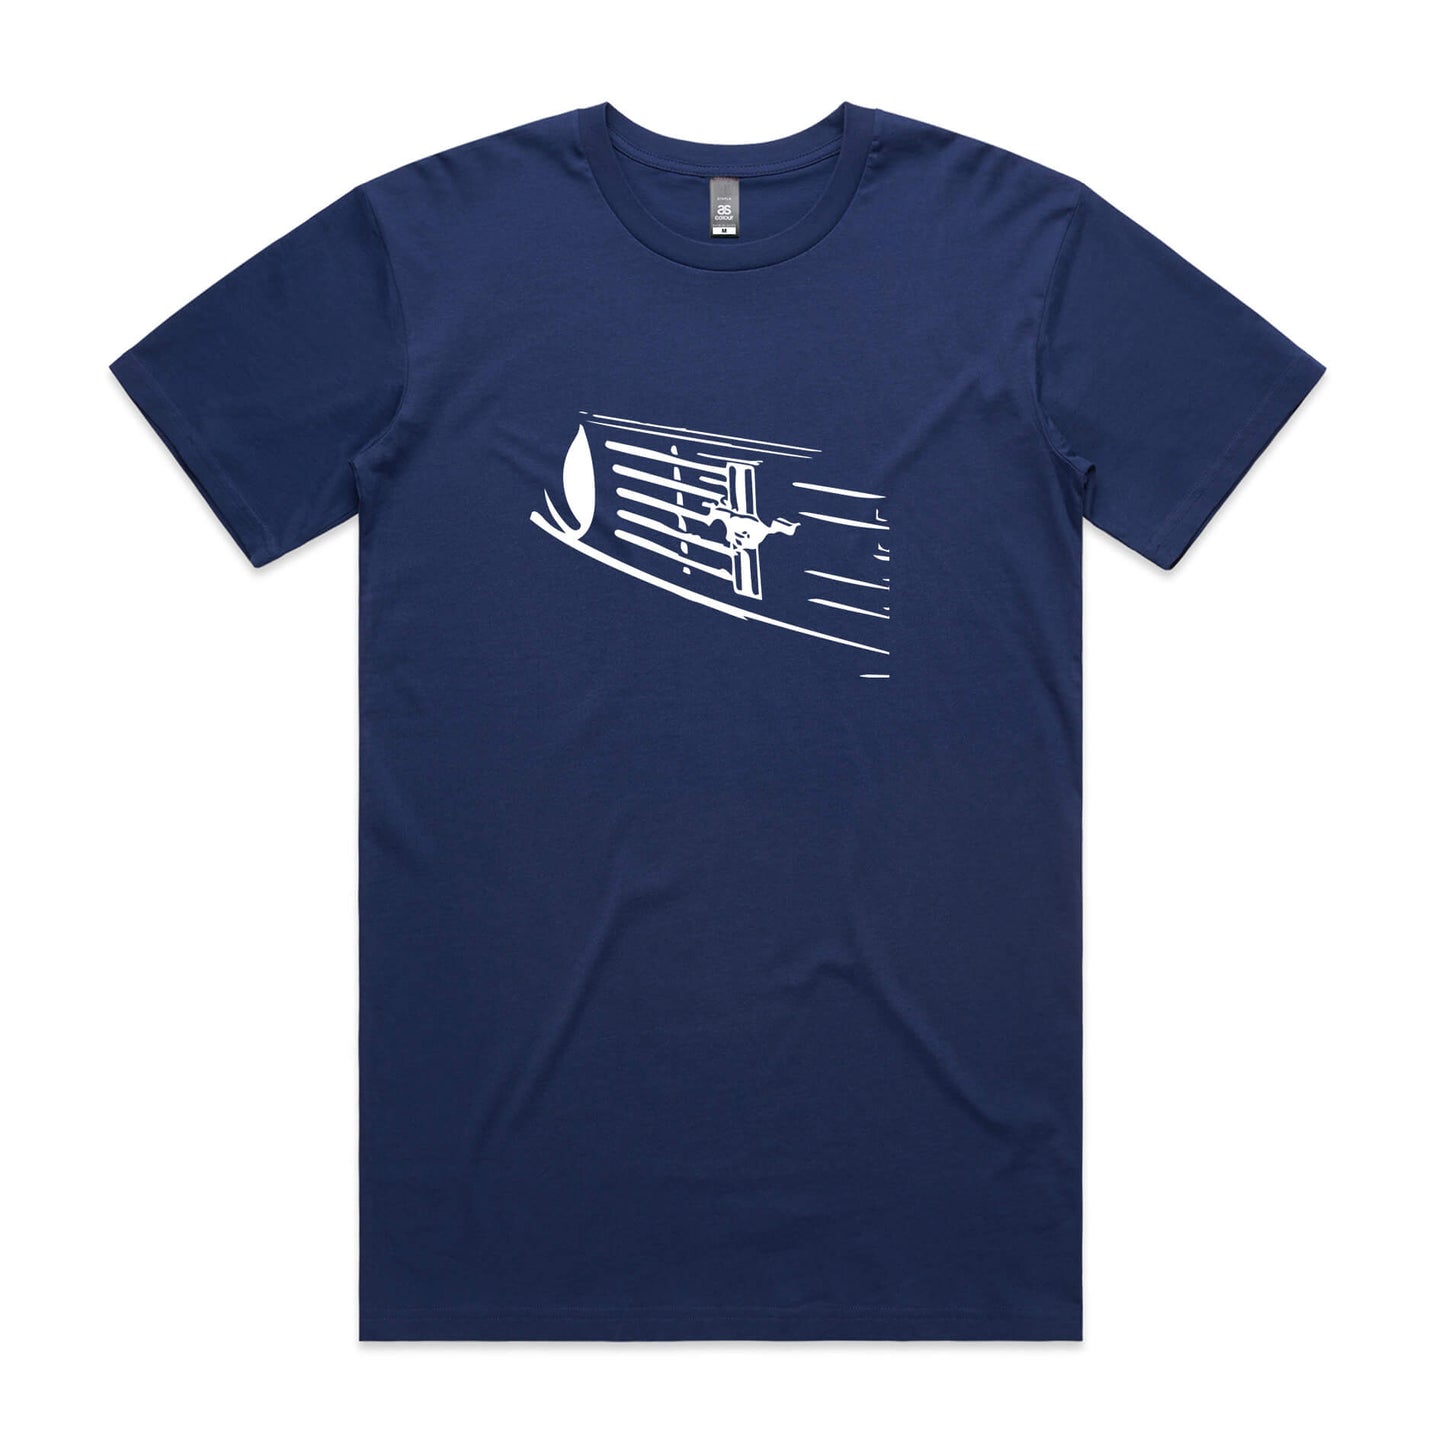 Cobalt blue t-shirt with line art Mustang grille and iconic pony logo in white.